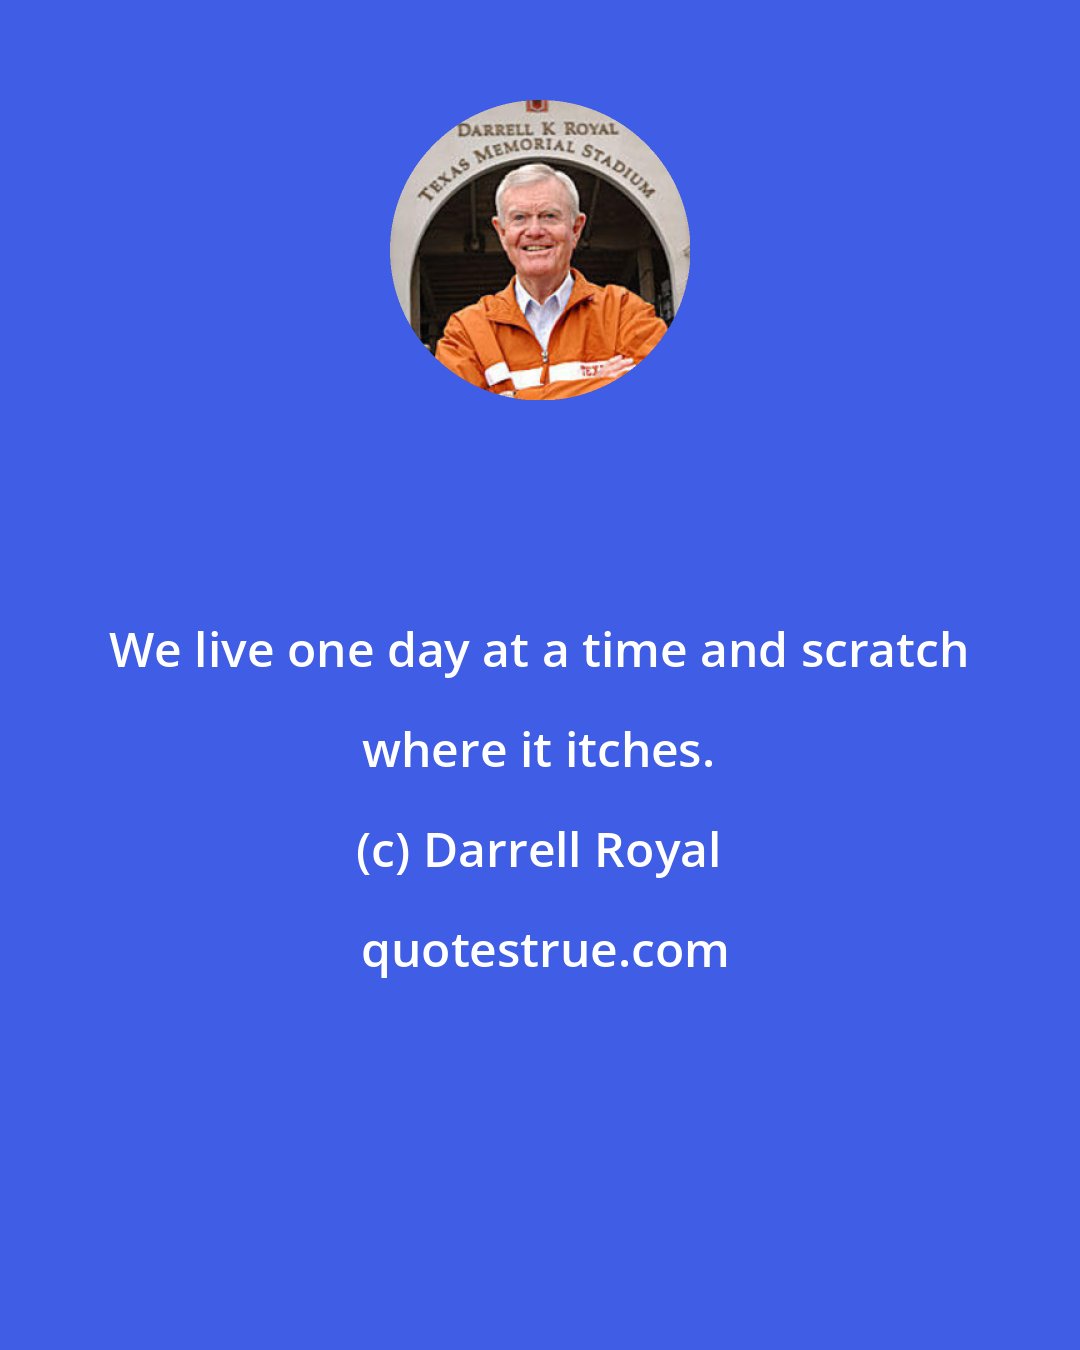 Darrell Royal: We live one day at a time and scratch where it itches.